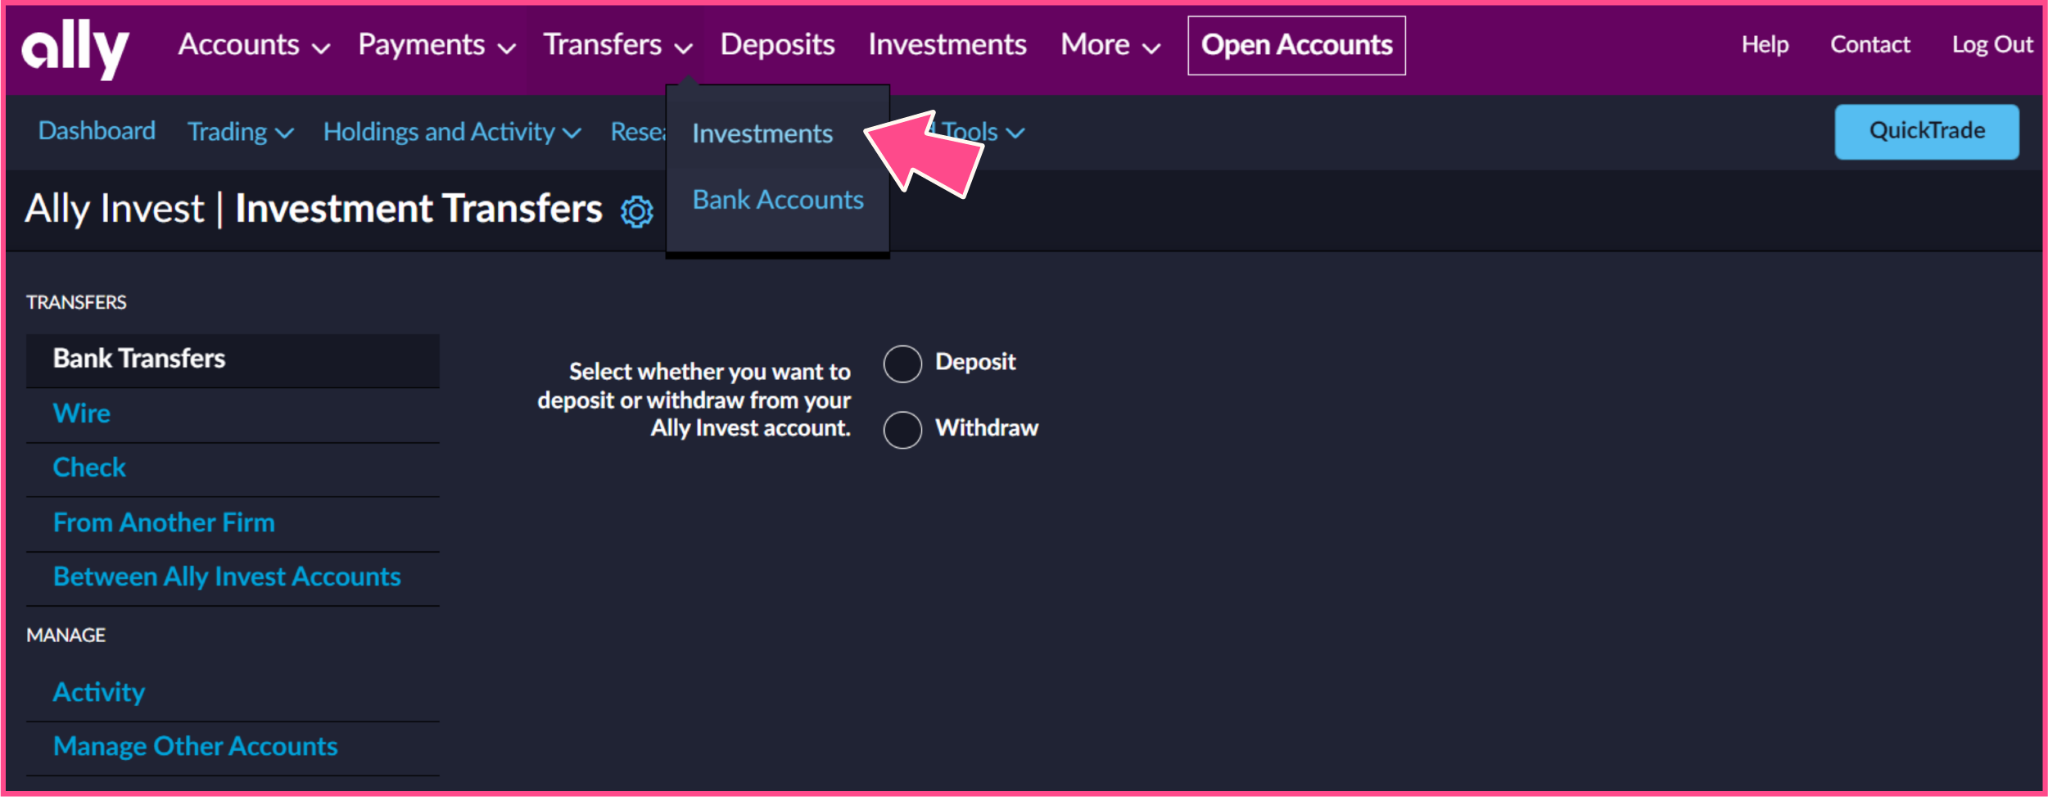 Arrow pointing to Investments on the Ally Invest page with a selection of transfers in the left column  (bank transfers, wire, check, from another firm, between Ally Invest accounts. Manage, activity, manage other accounts). 